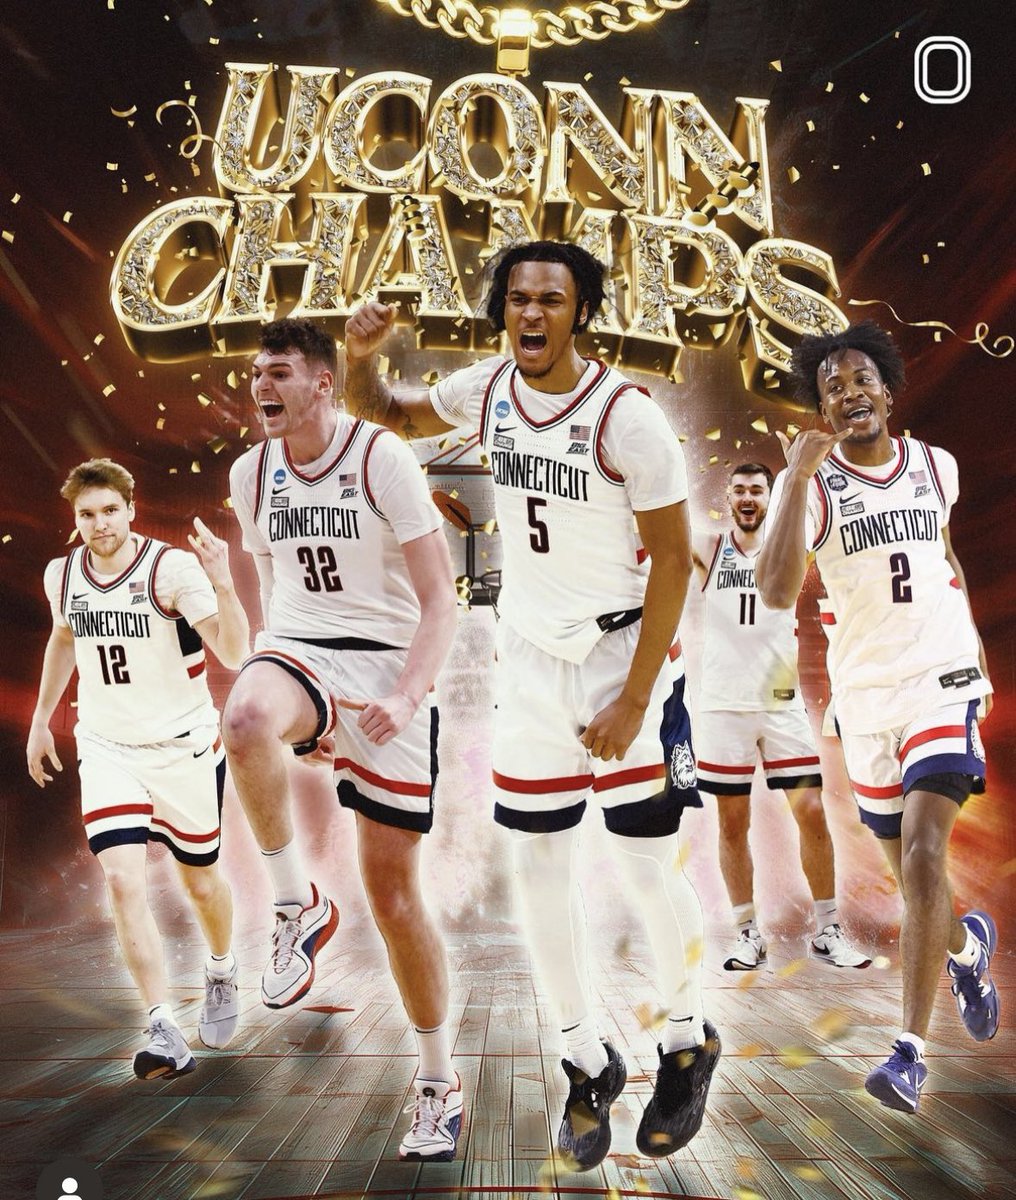 Special team. #uconn #ct #NCAABasketball #NCAAChampionship